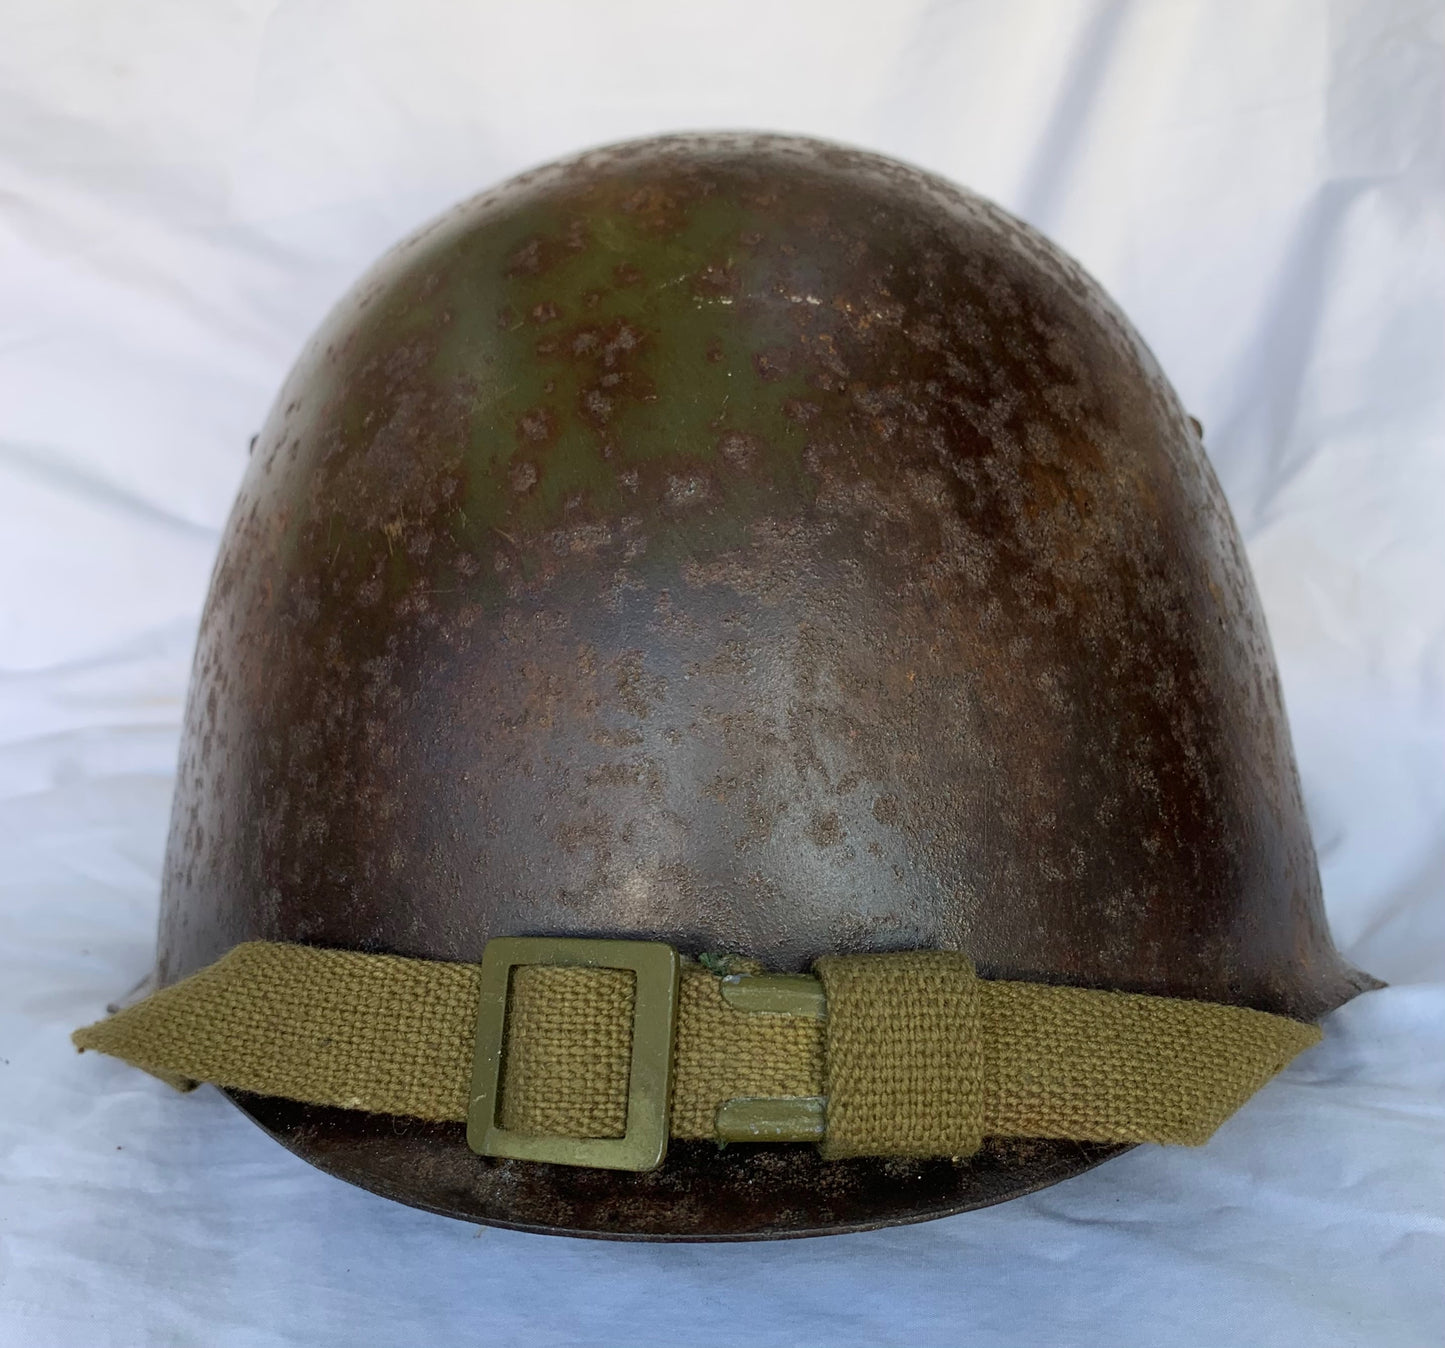 WW2 Russian SSh-39 Helmet with Liner and Chinstrap.